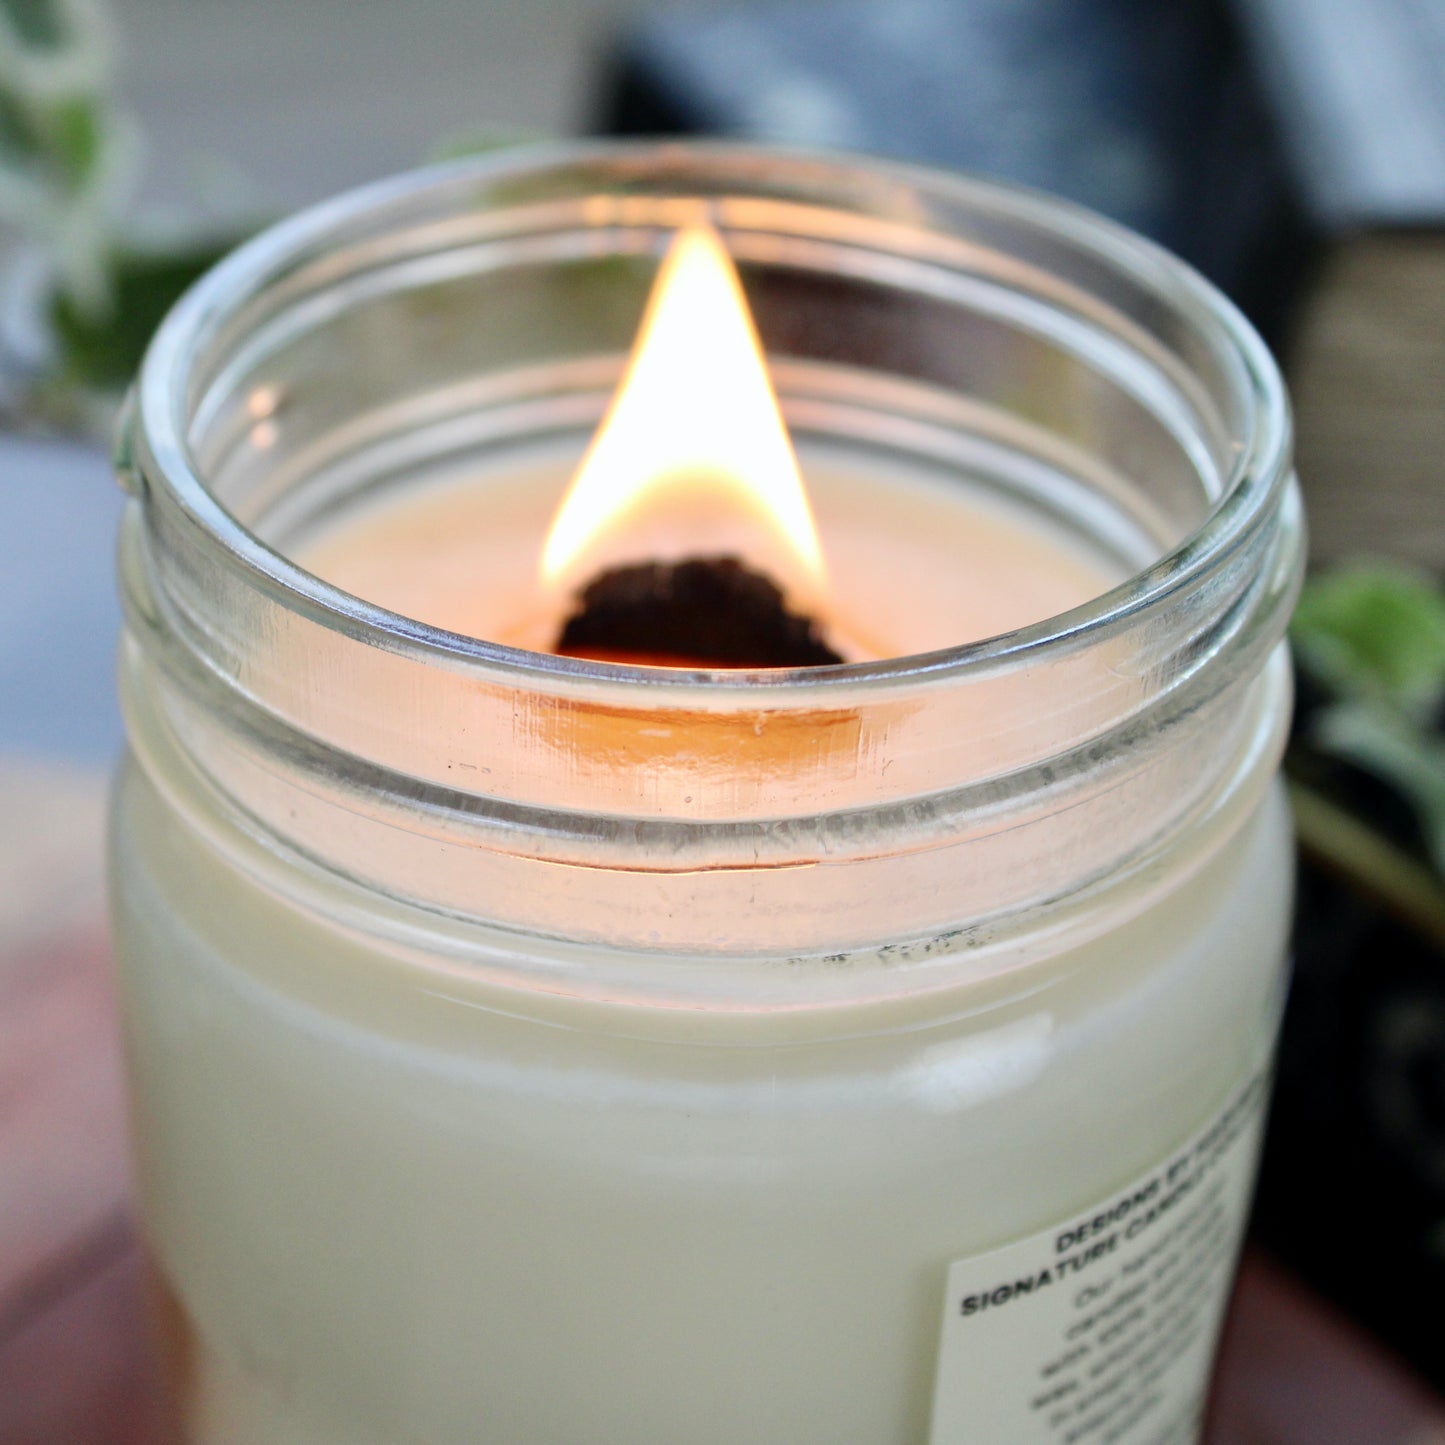 Blossoming Orange Soy Candle